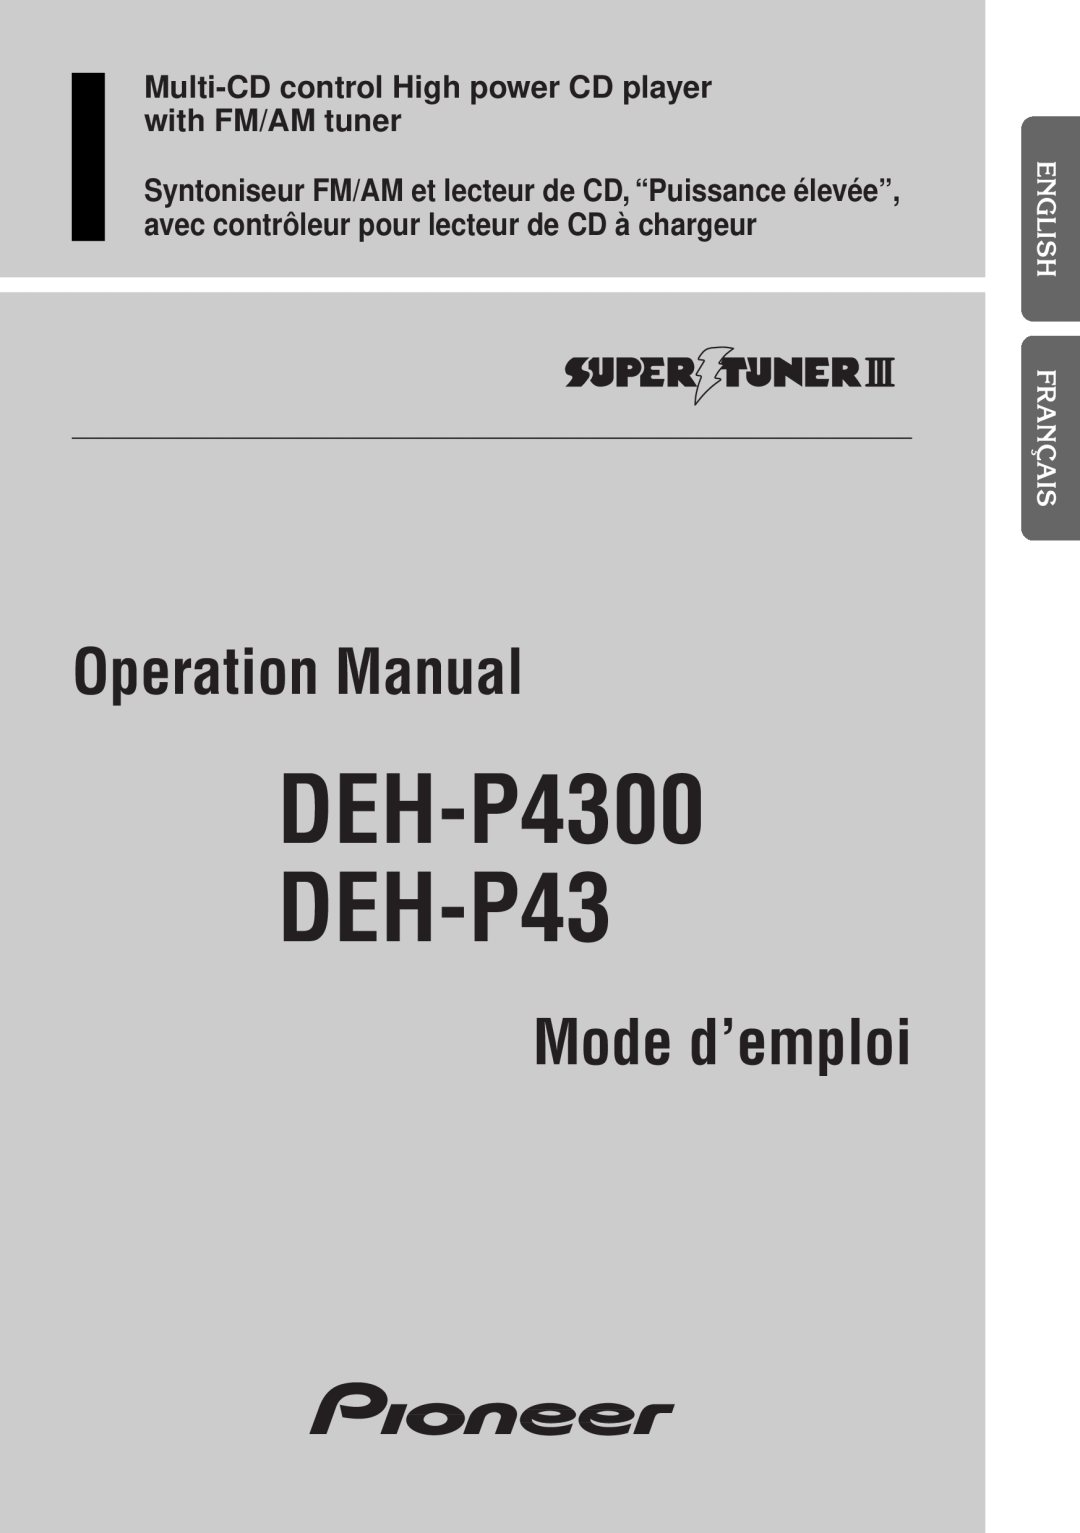 Pioneer operation manual DEH-P4300 DEH-P43, Mode d’emploi 